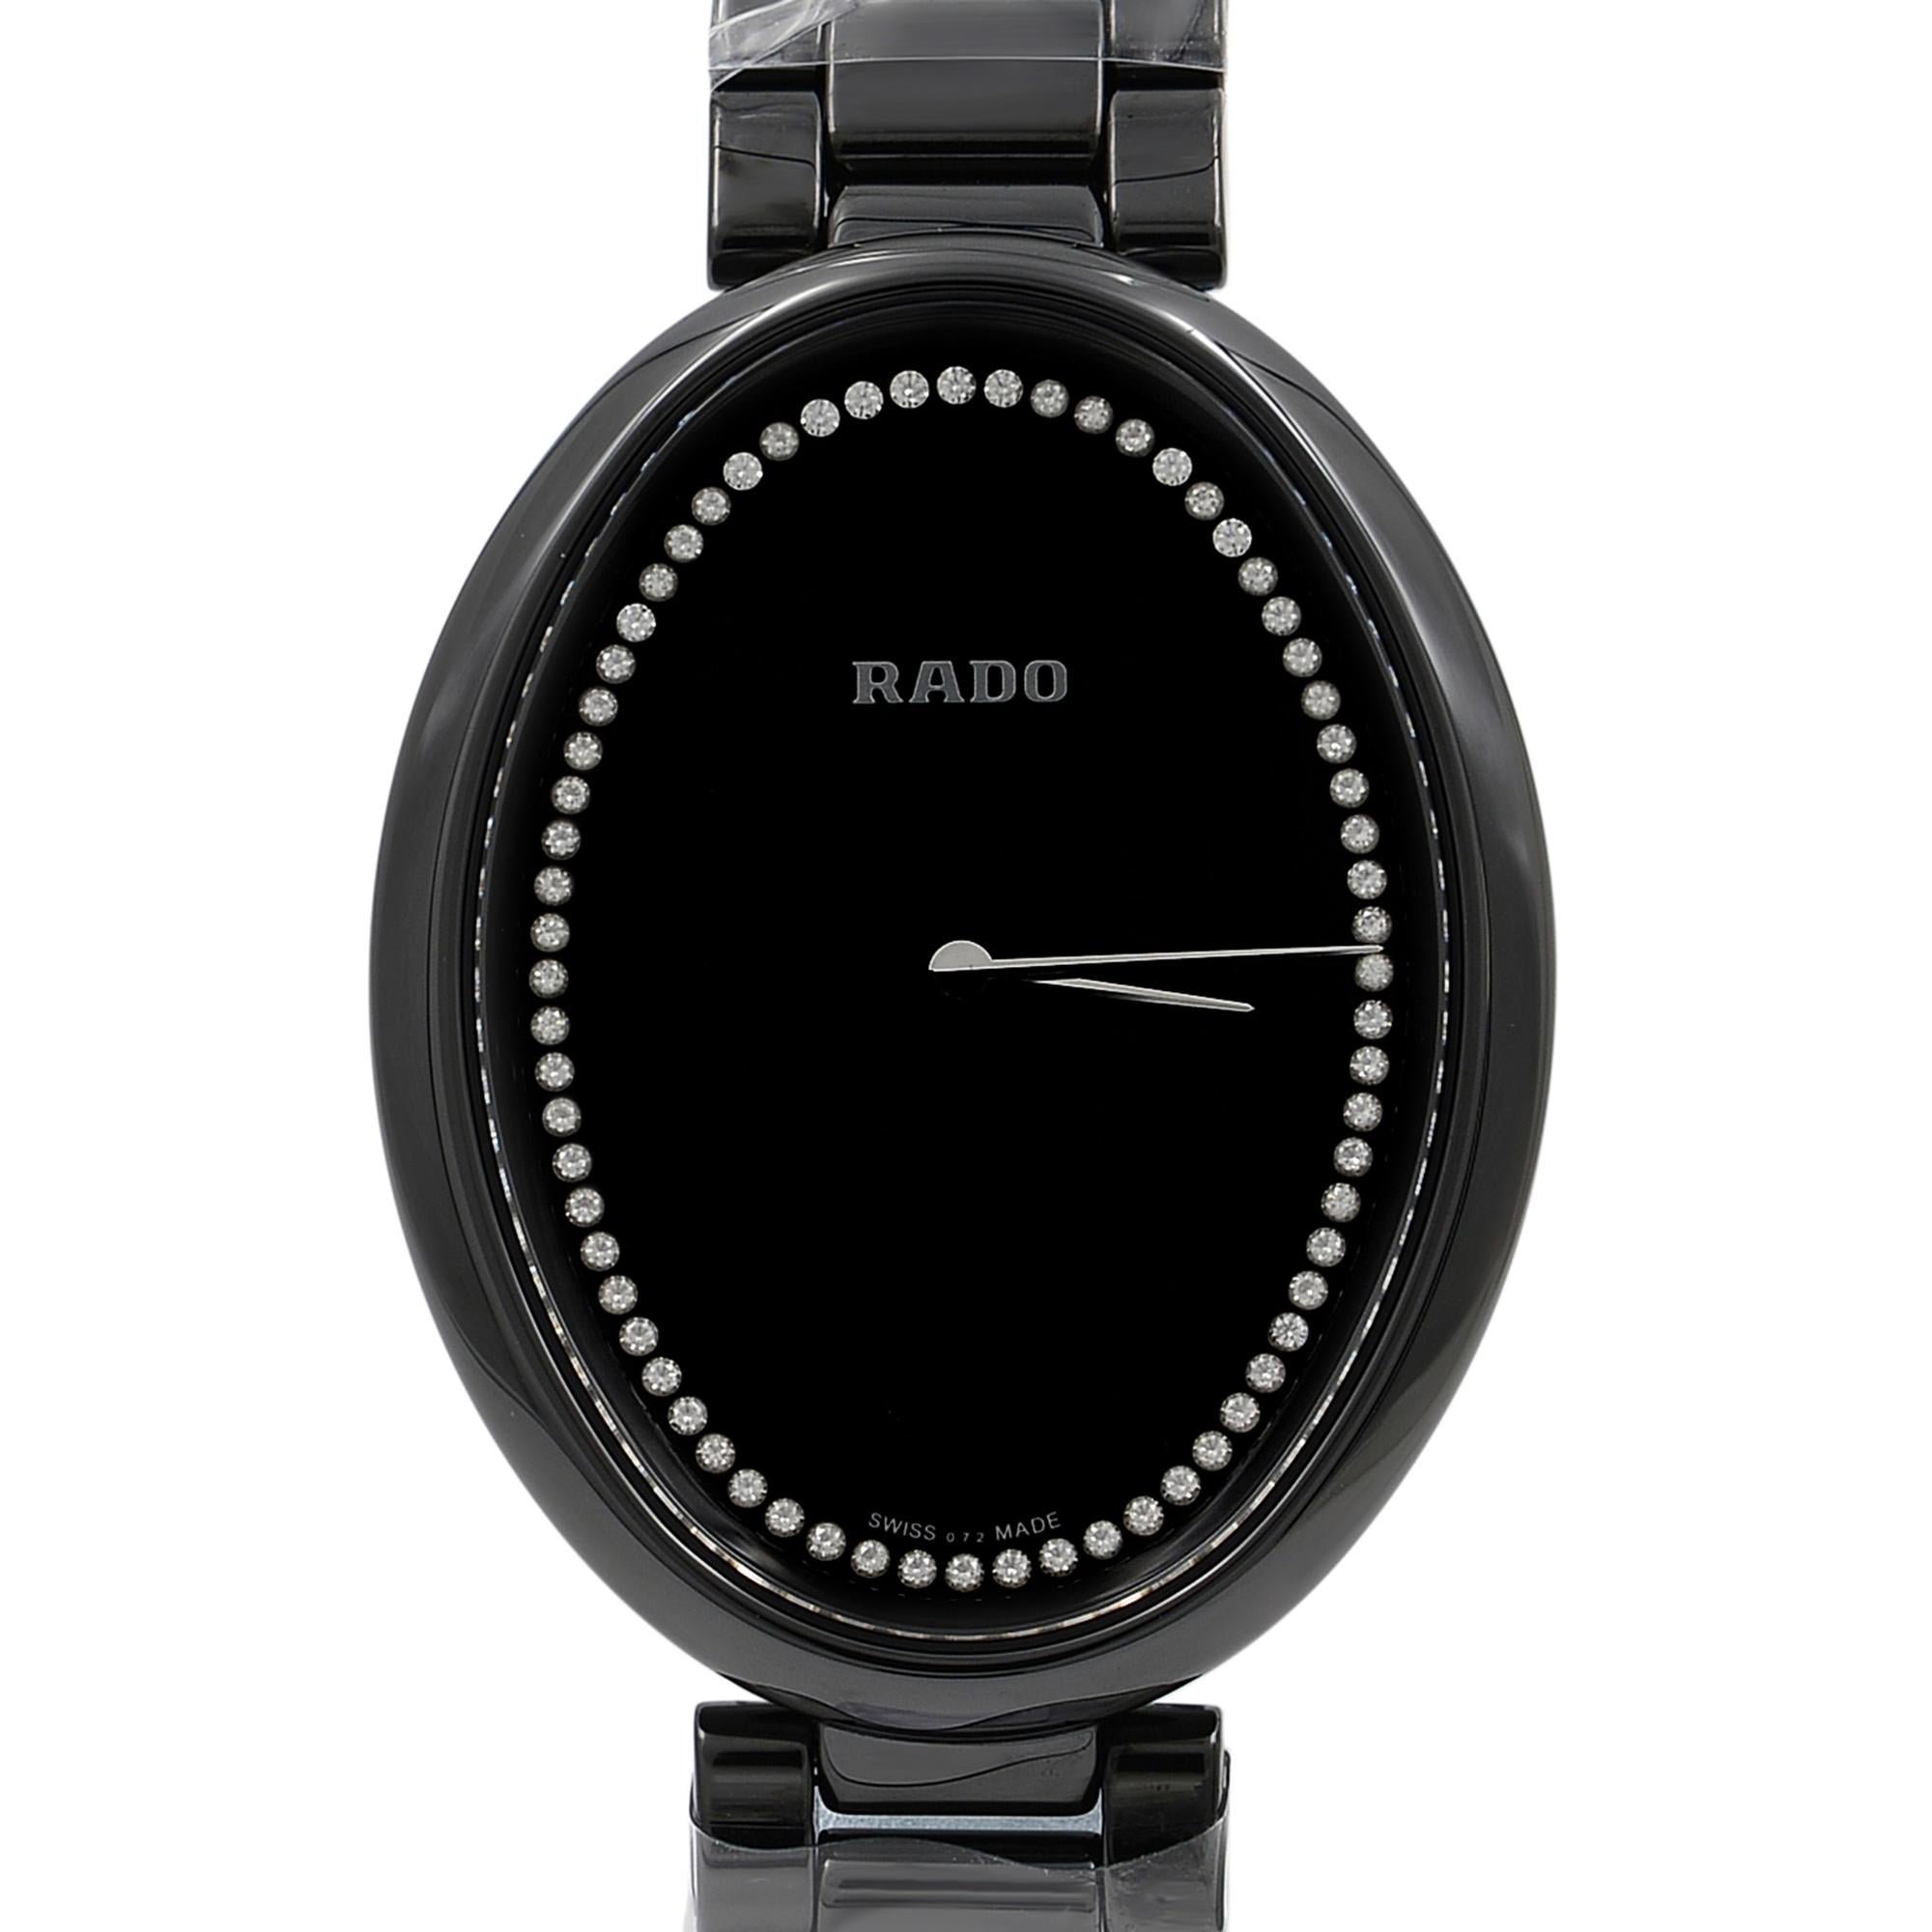 This brand new Rado Esenza R53093722 is a beautiful Ladies timepiece that is powered by a quartz movement which is cased in a ceramic case. It has a oval shape face, diamonds dial and has hand diamonds, unspecified style markers. It is completed